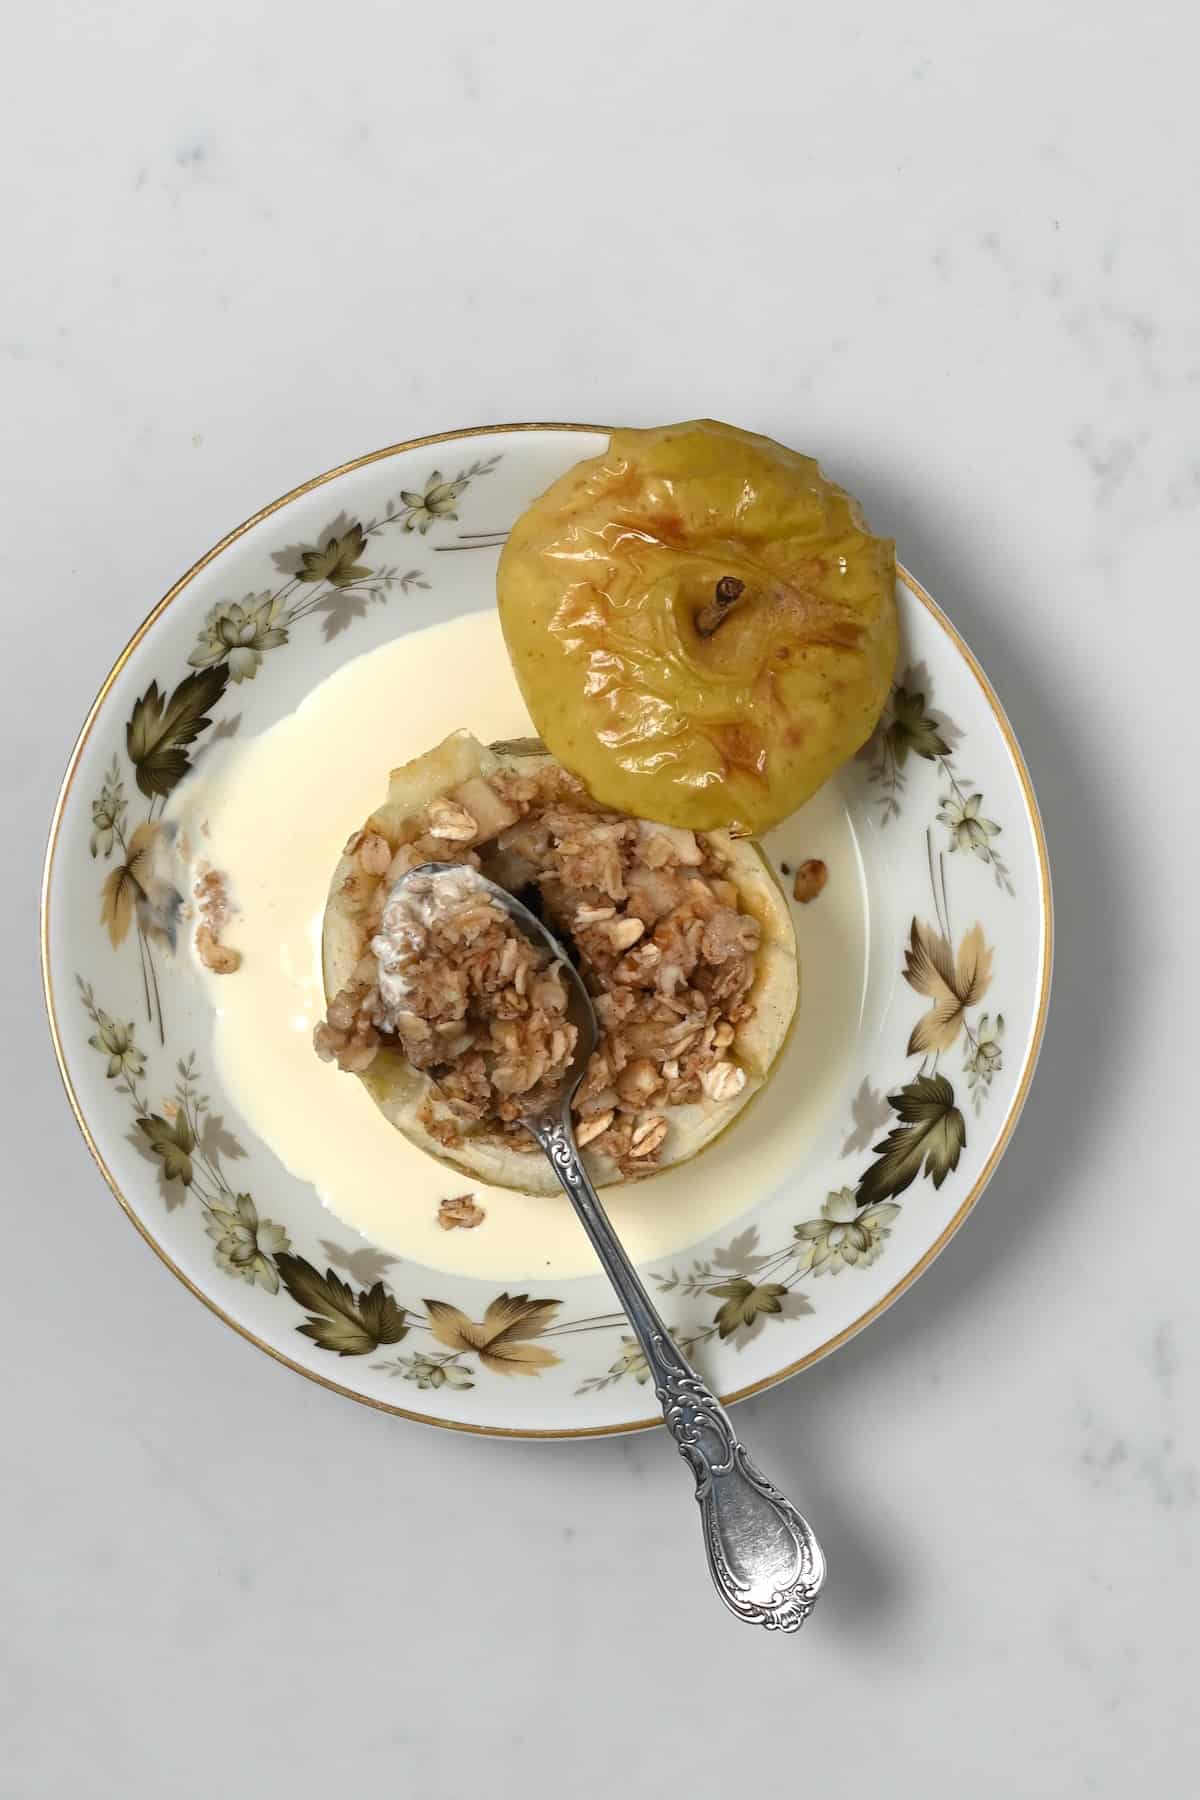 Baked apple stuffed with oats and spices